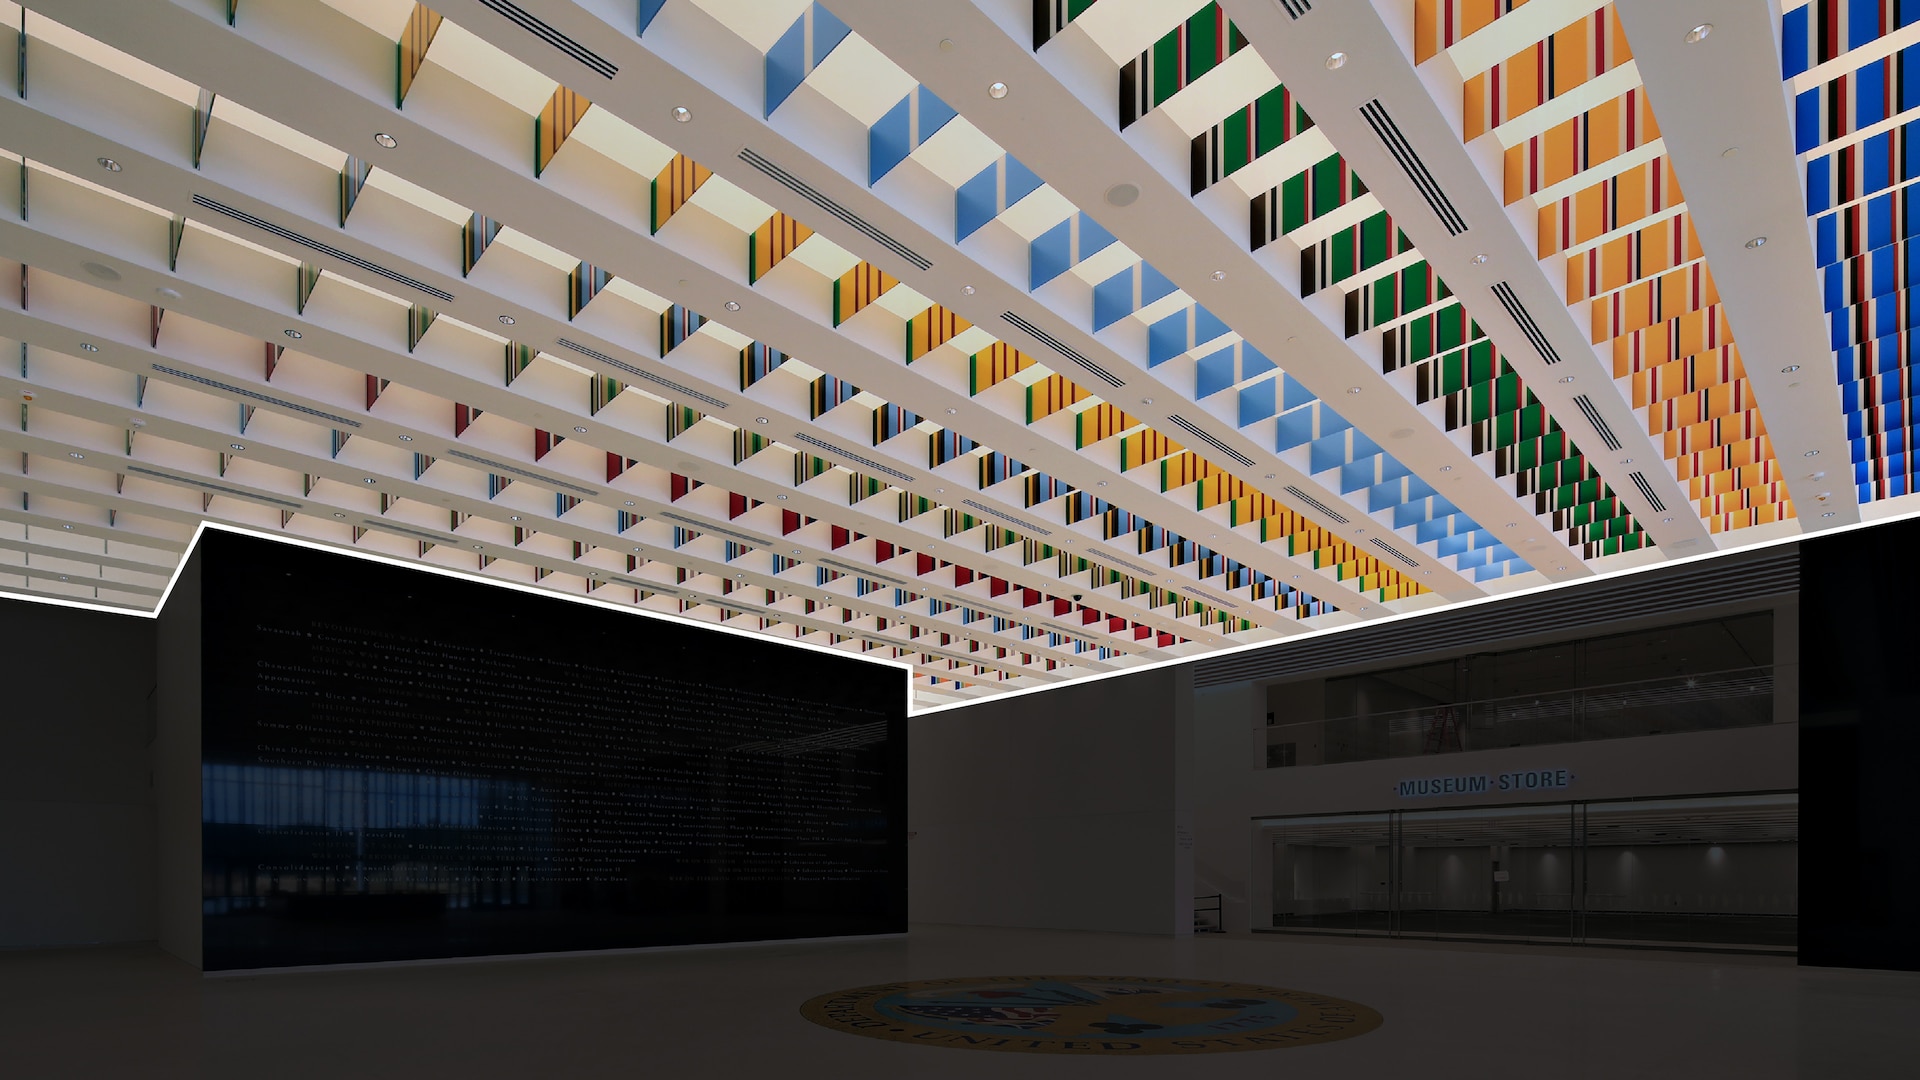 The ceiling installation shown has rows of colorful flags, all the same size and width.